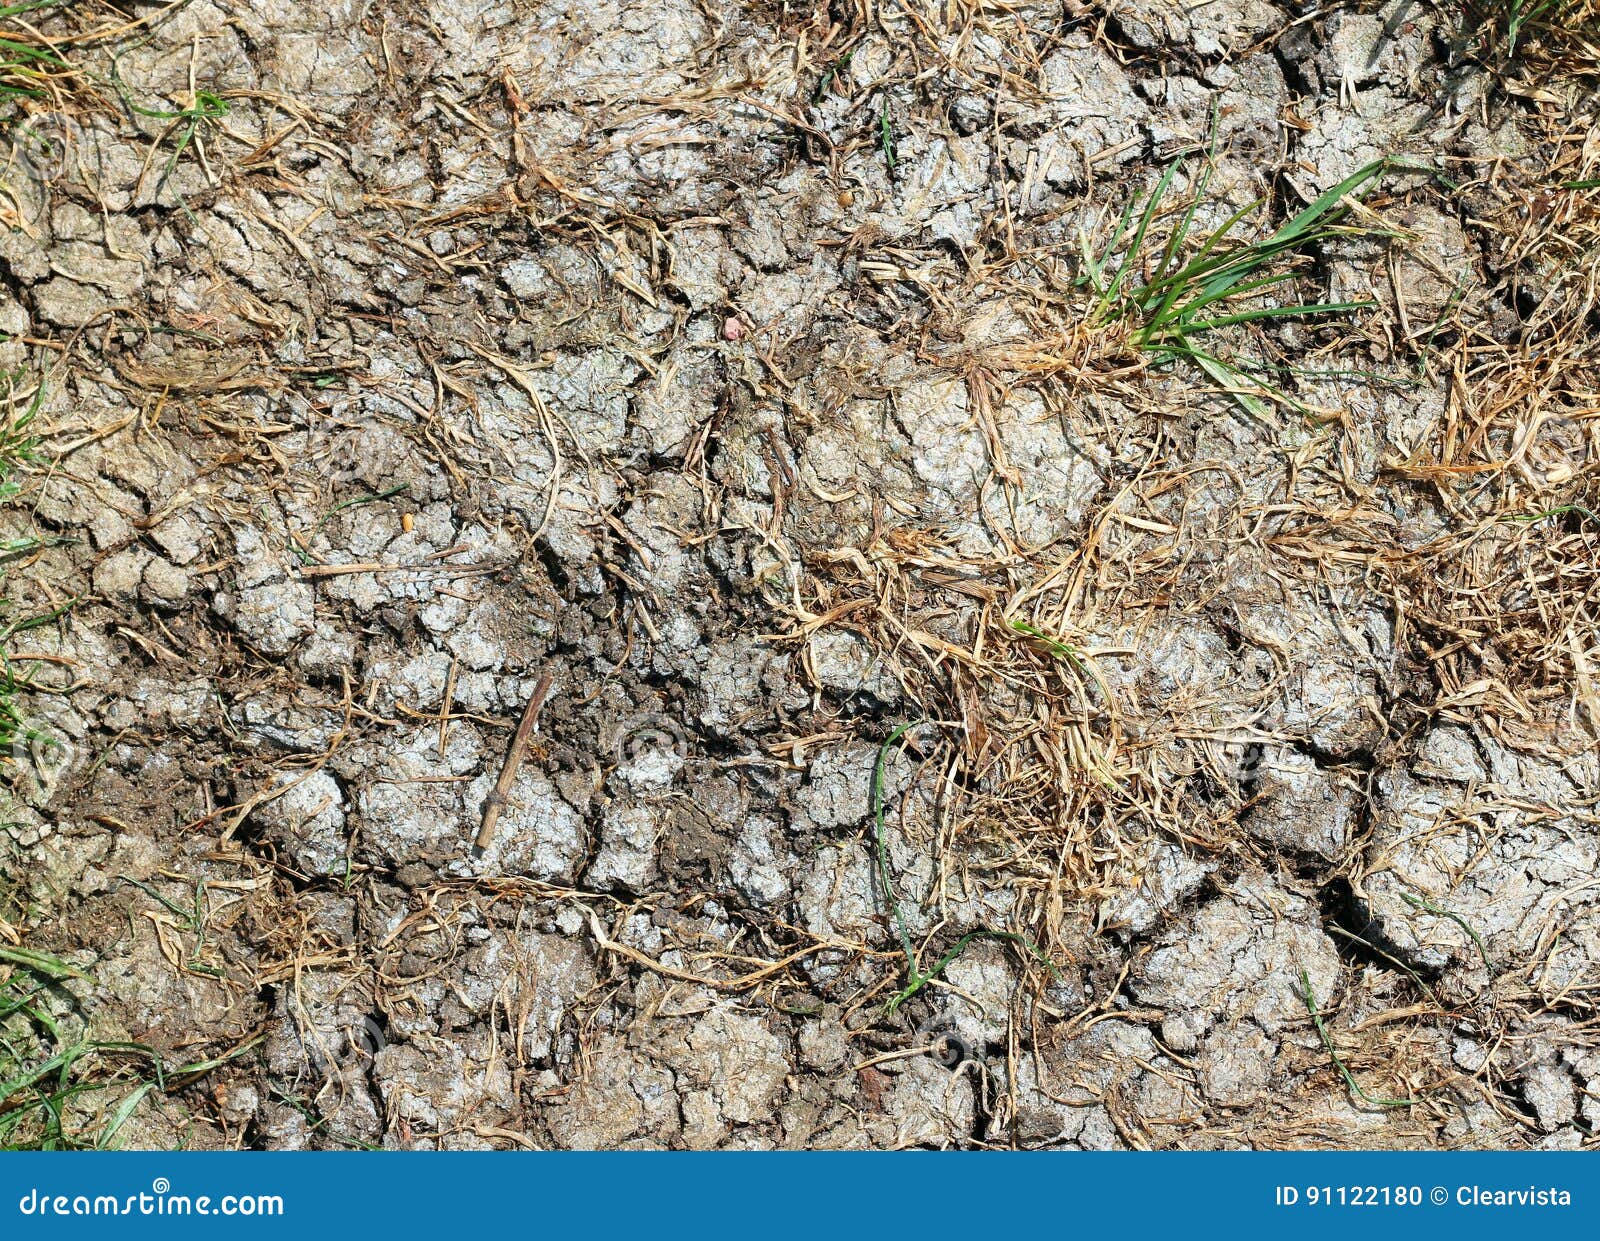 drought. parched dry cracked ground.